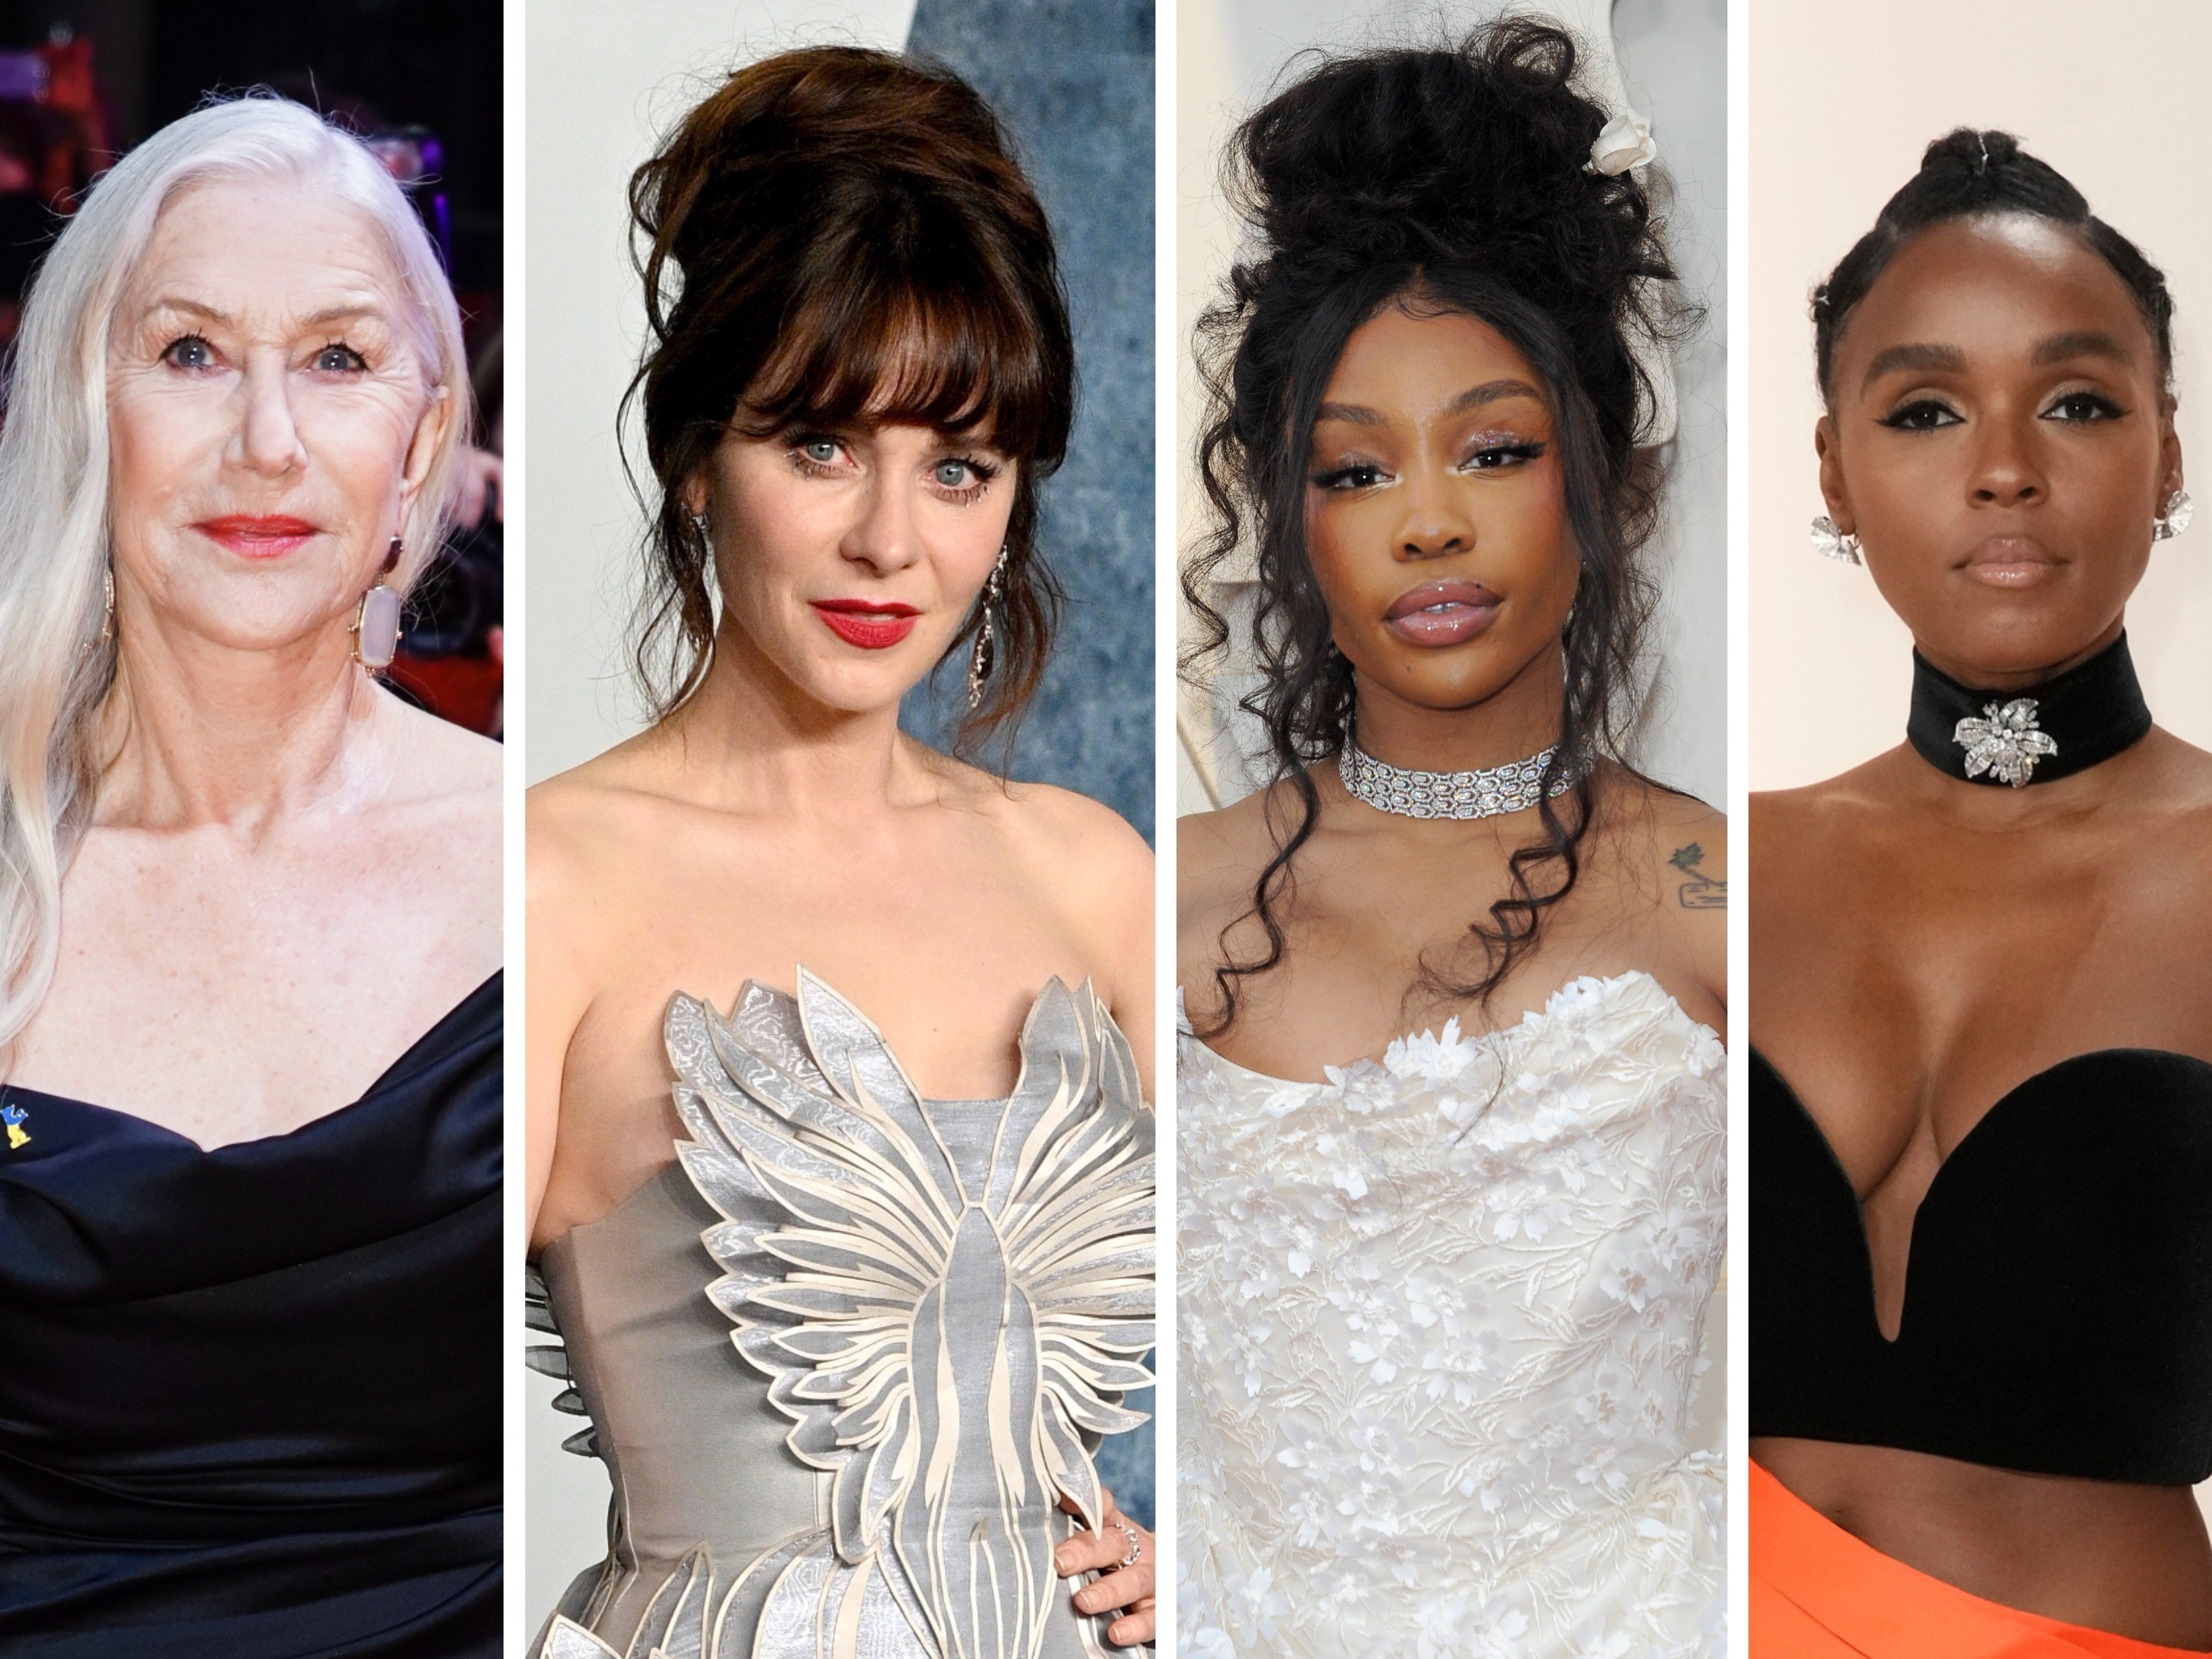 Helen Mirren, Zooey Deschanel, SZA and Janelle Monáe all share a love of thrifting. Photos: Getty Images; AP; EPA-EFE